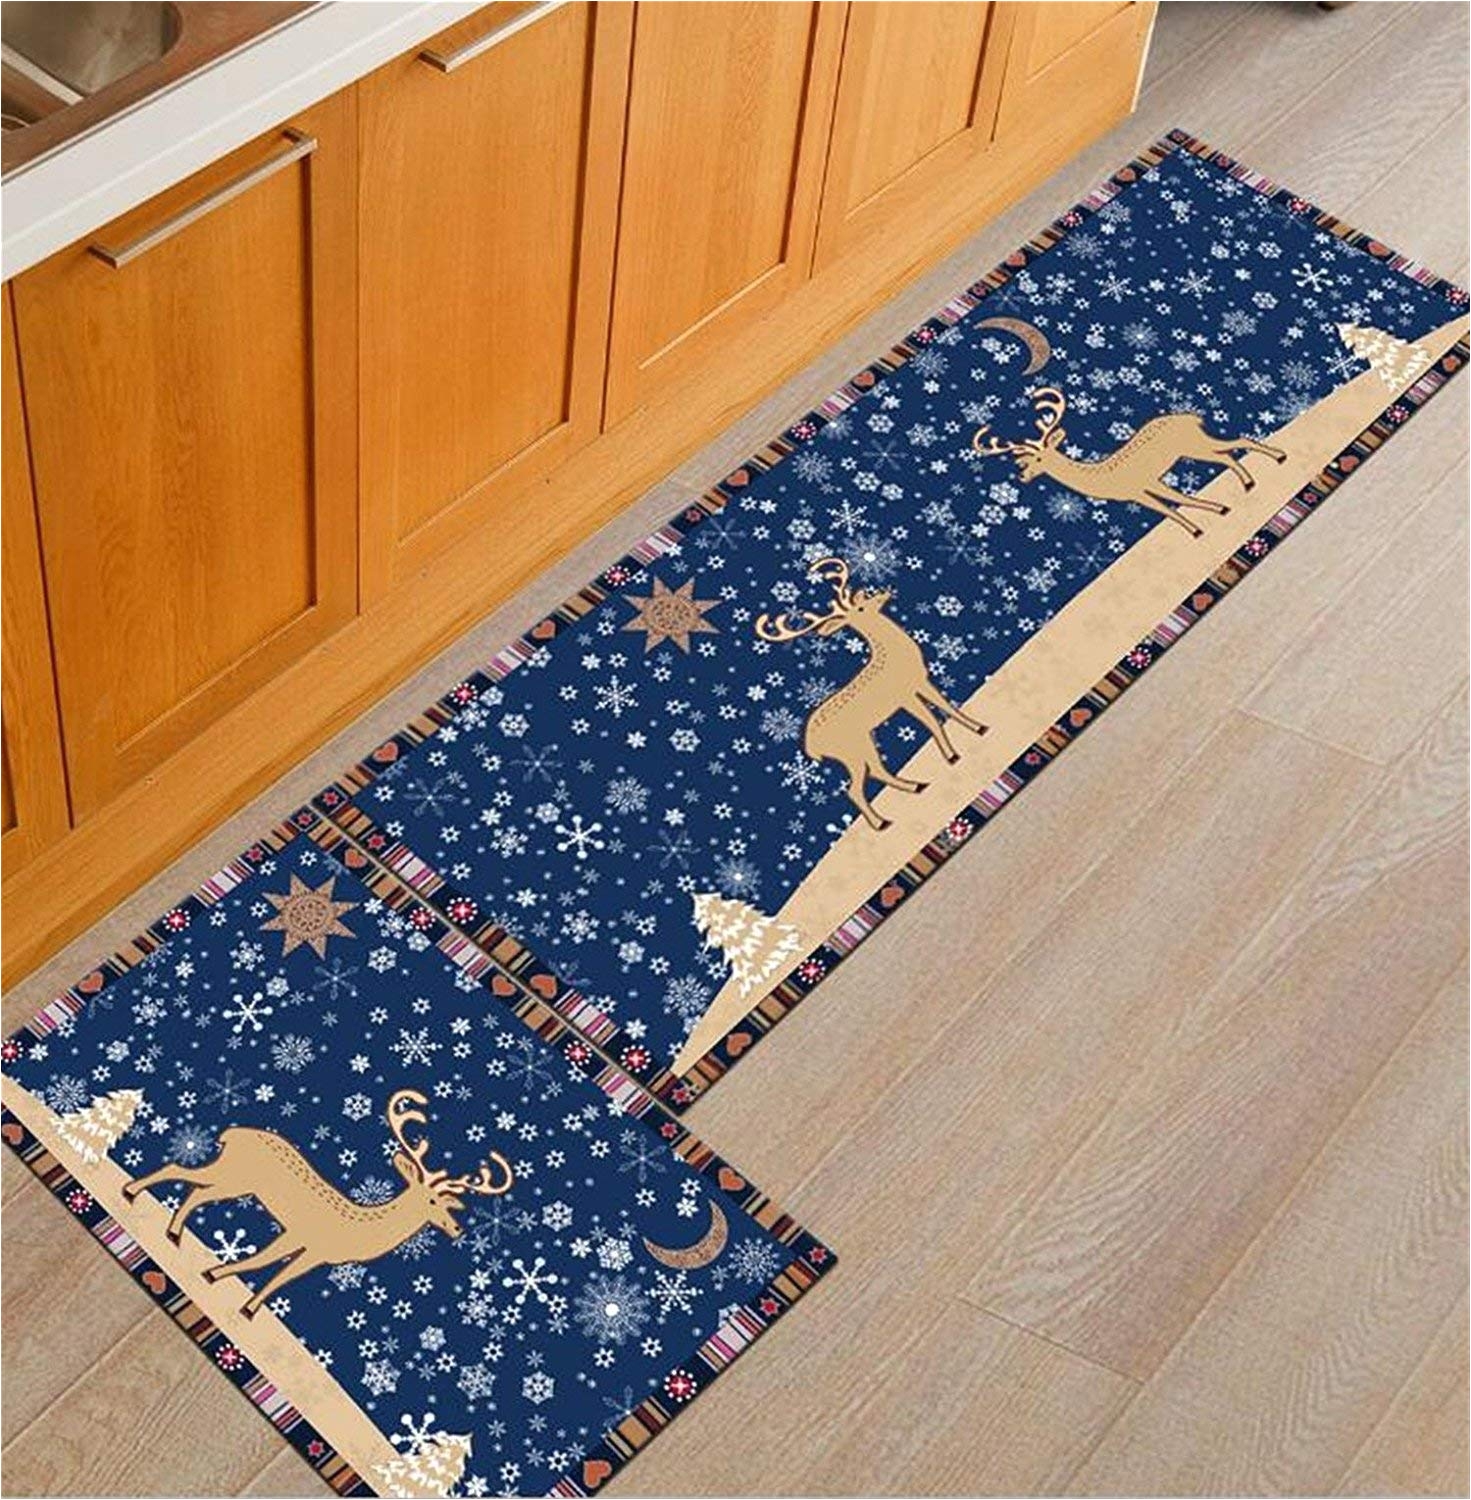 amazon com rubber back home and kitchen rugs non skid slip decorative runner door mats low profile modern thin indoor floor area rugs for kitchen clothing